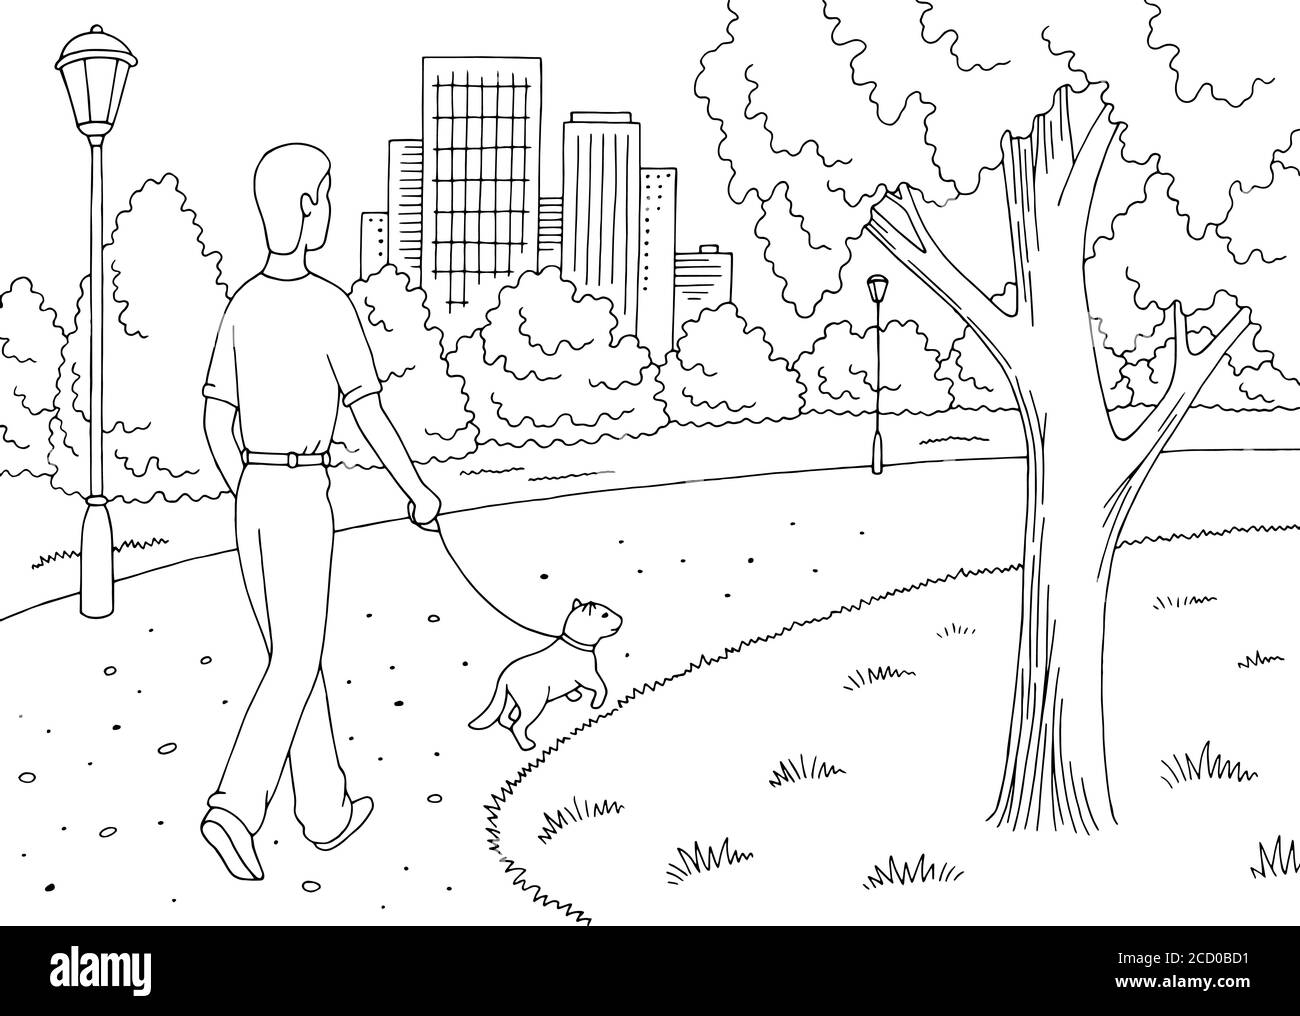 Park graphic black white landscape sketch illustration vector. Man is walking with a dog Stock Vector